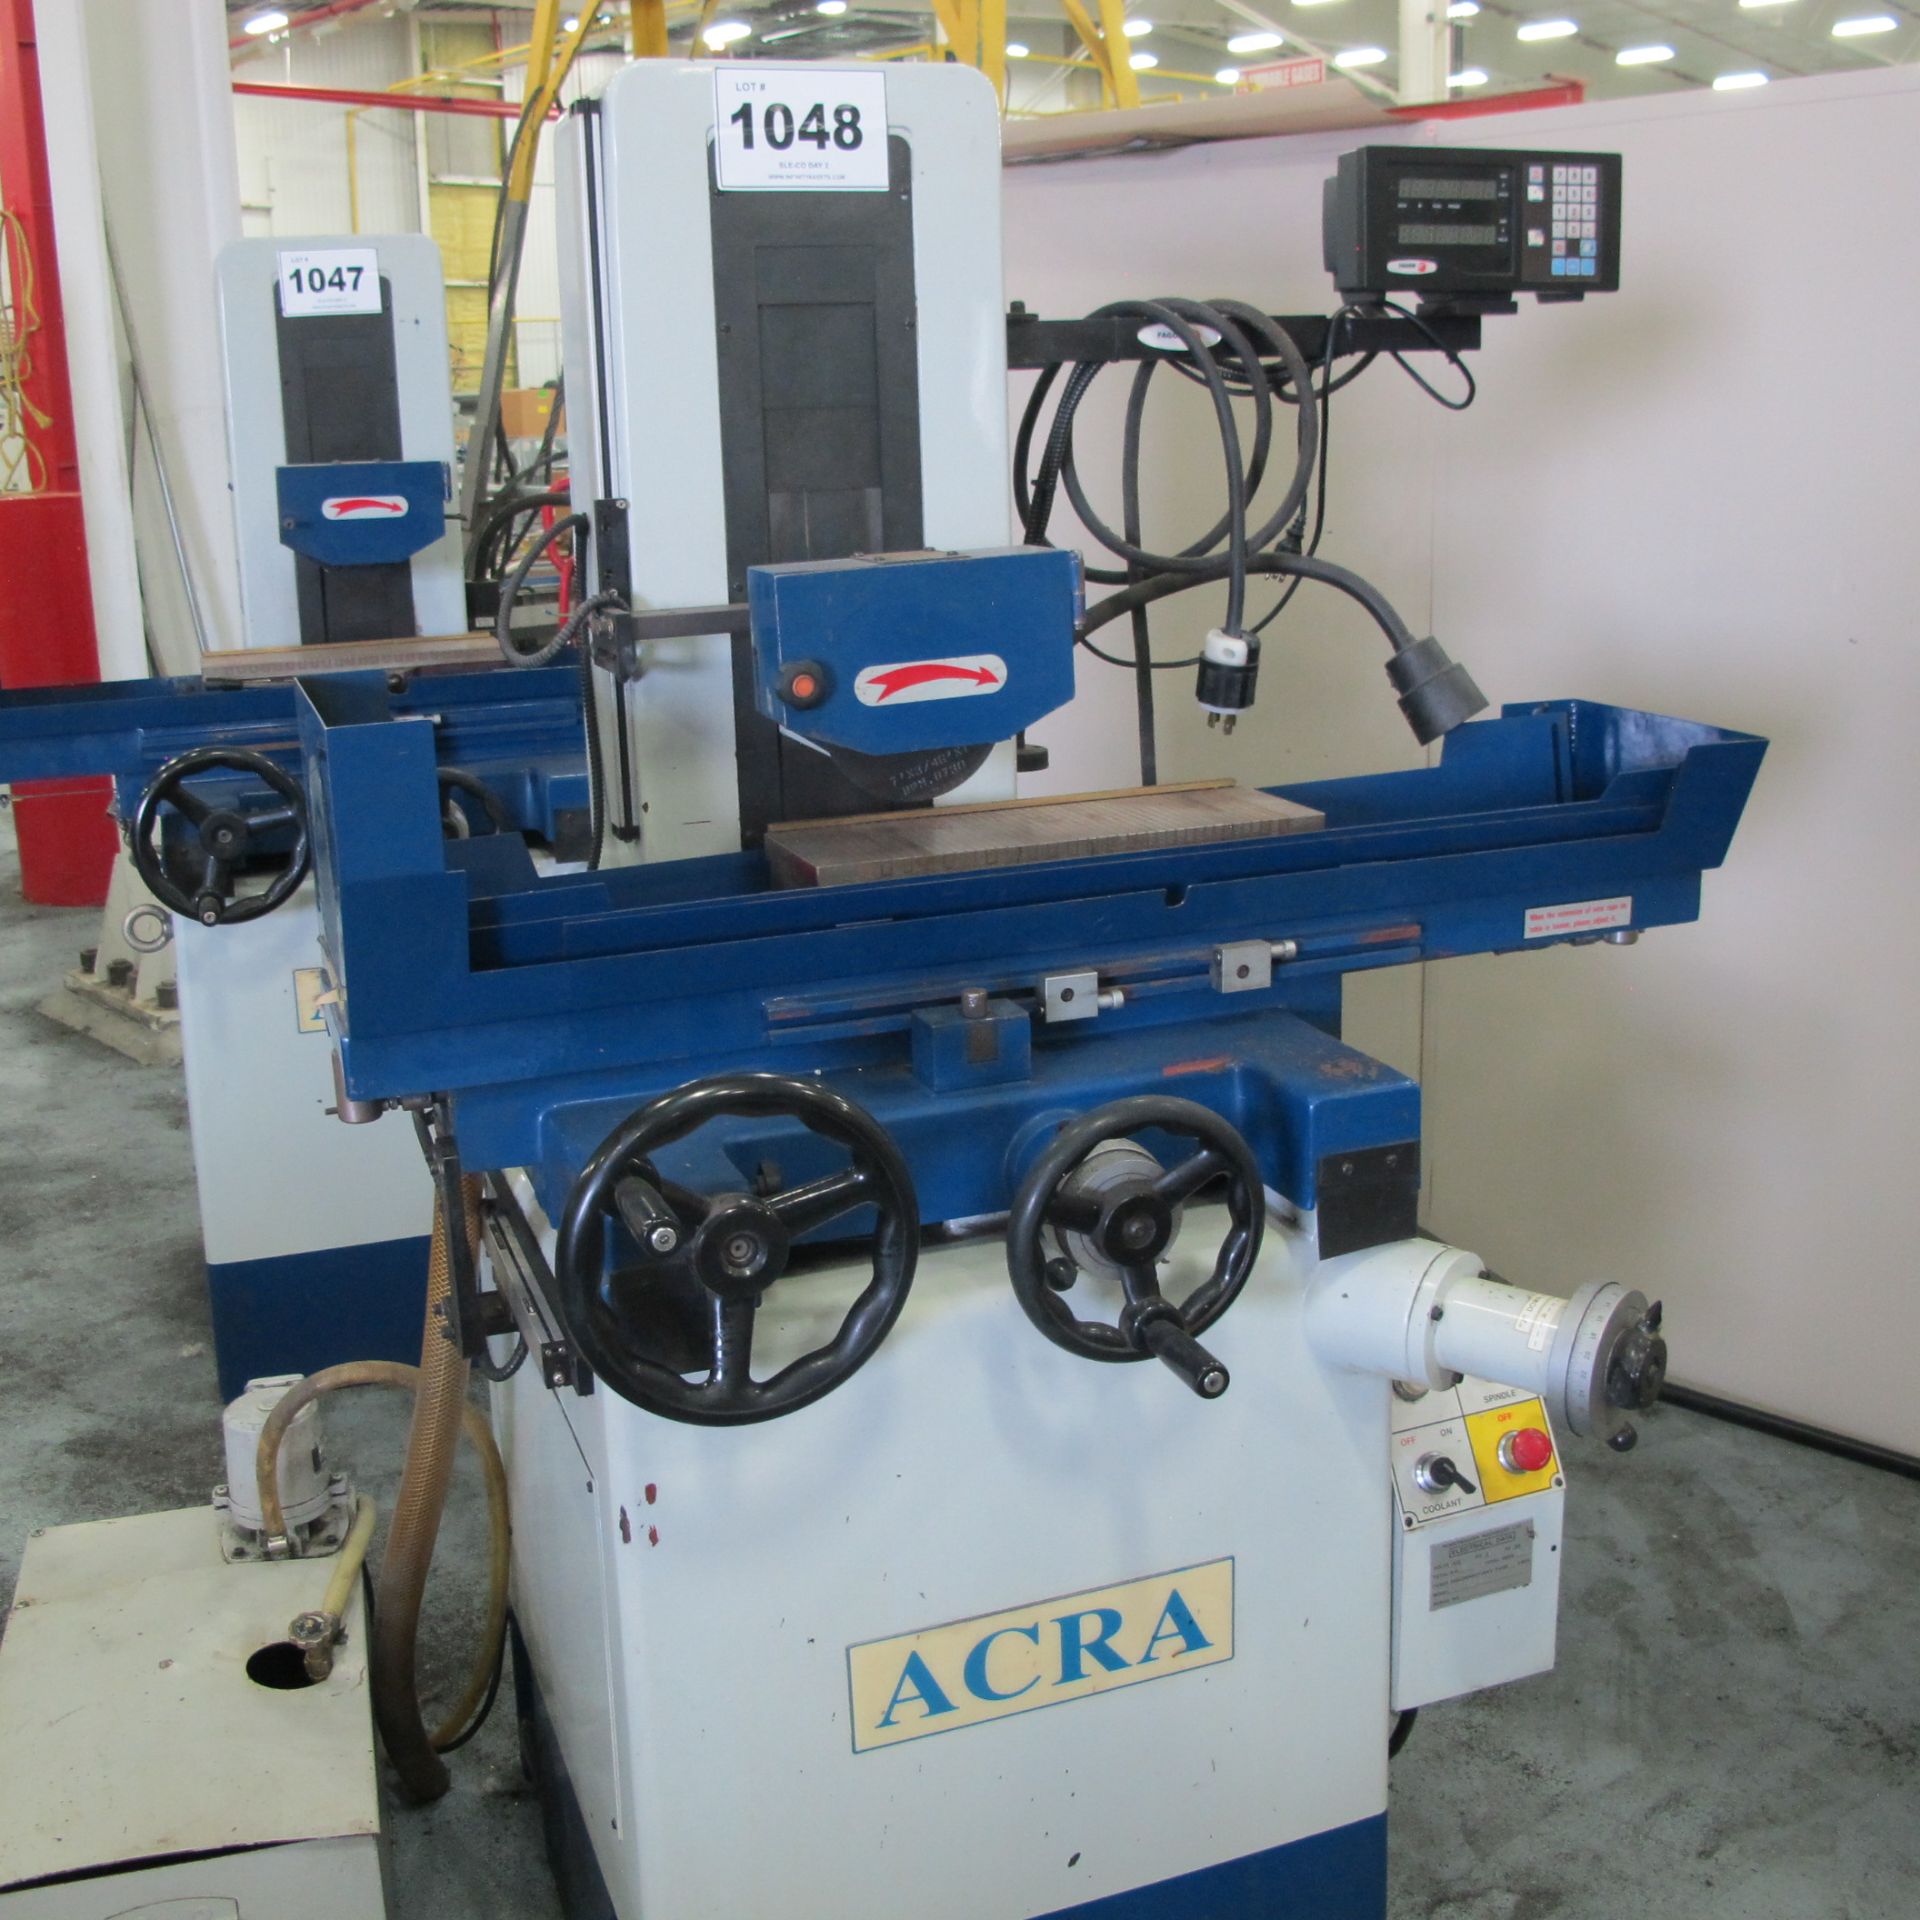 2002 ACRA APSG-618B SURFACE GRINDER WITH FAGOR DRO S/N: 123, 6" X 18" MAGNETIC CHUCK - Image 2 of 4